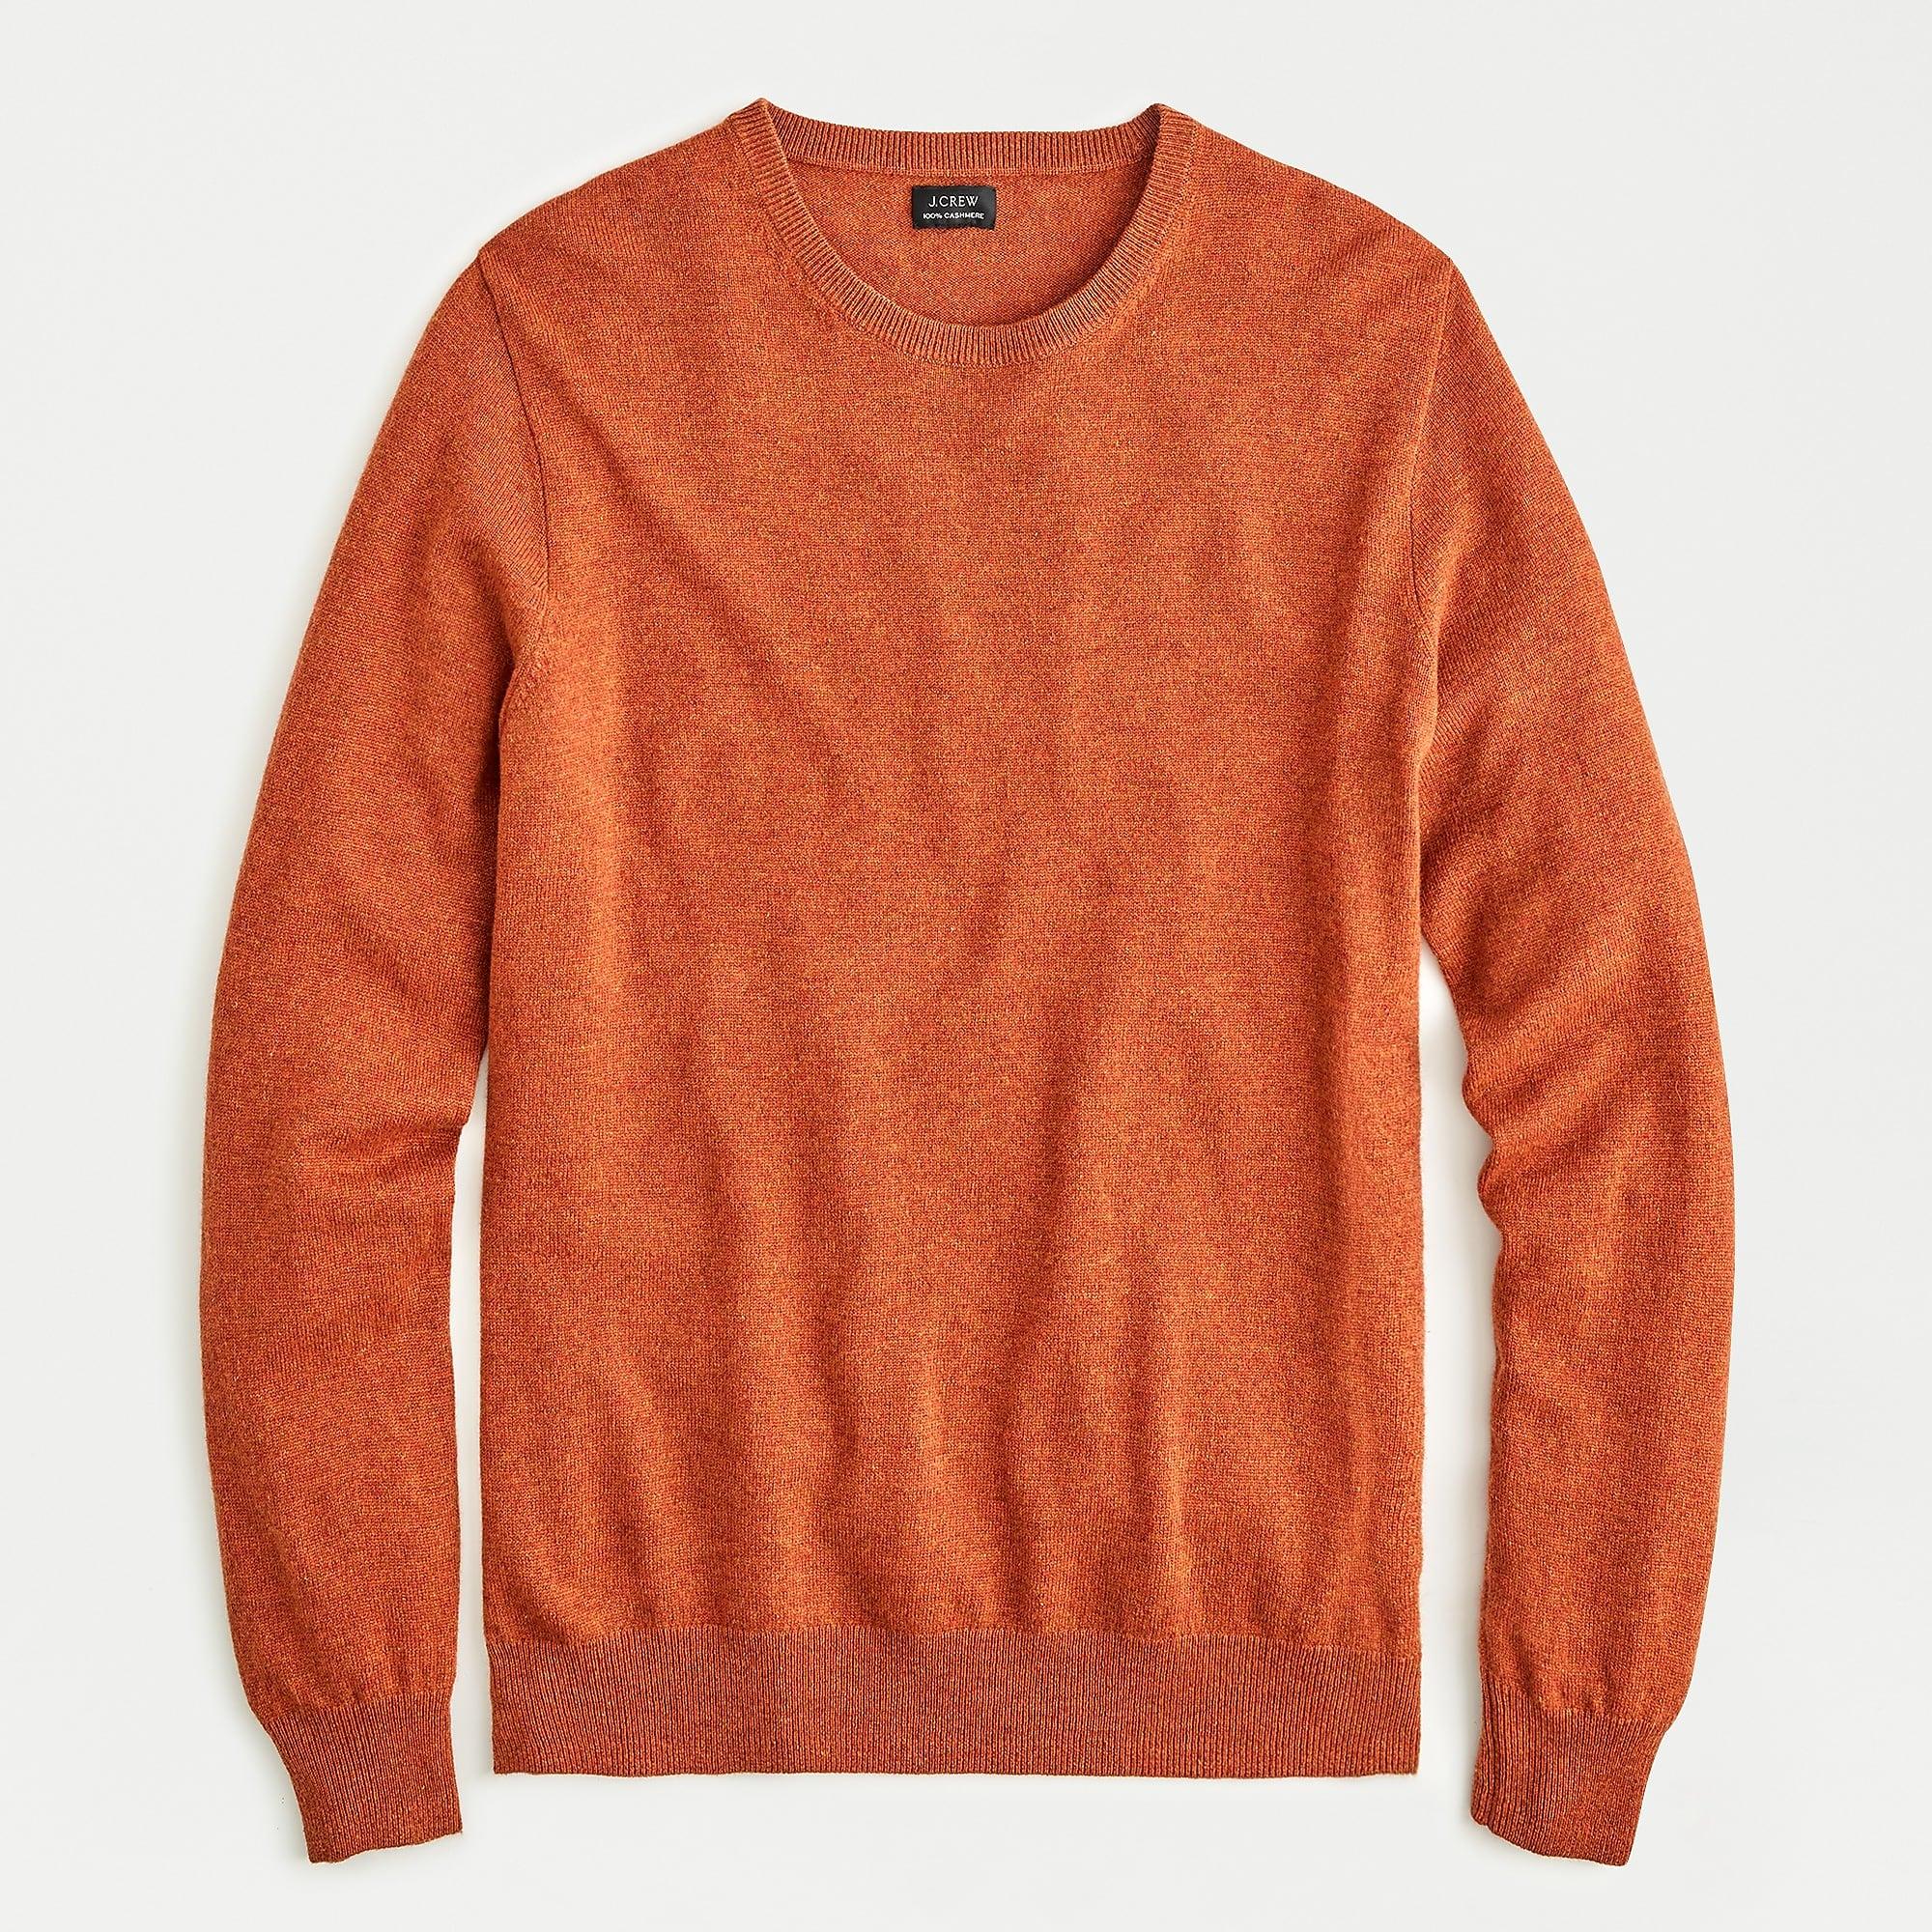 J.Crew Everyday Cashmere Crewneck Sweater In Solid in Orange for Men - Lyst